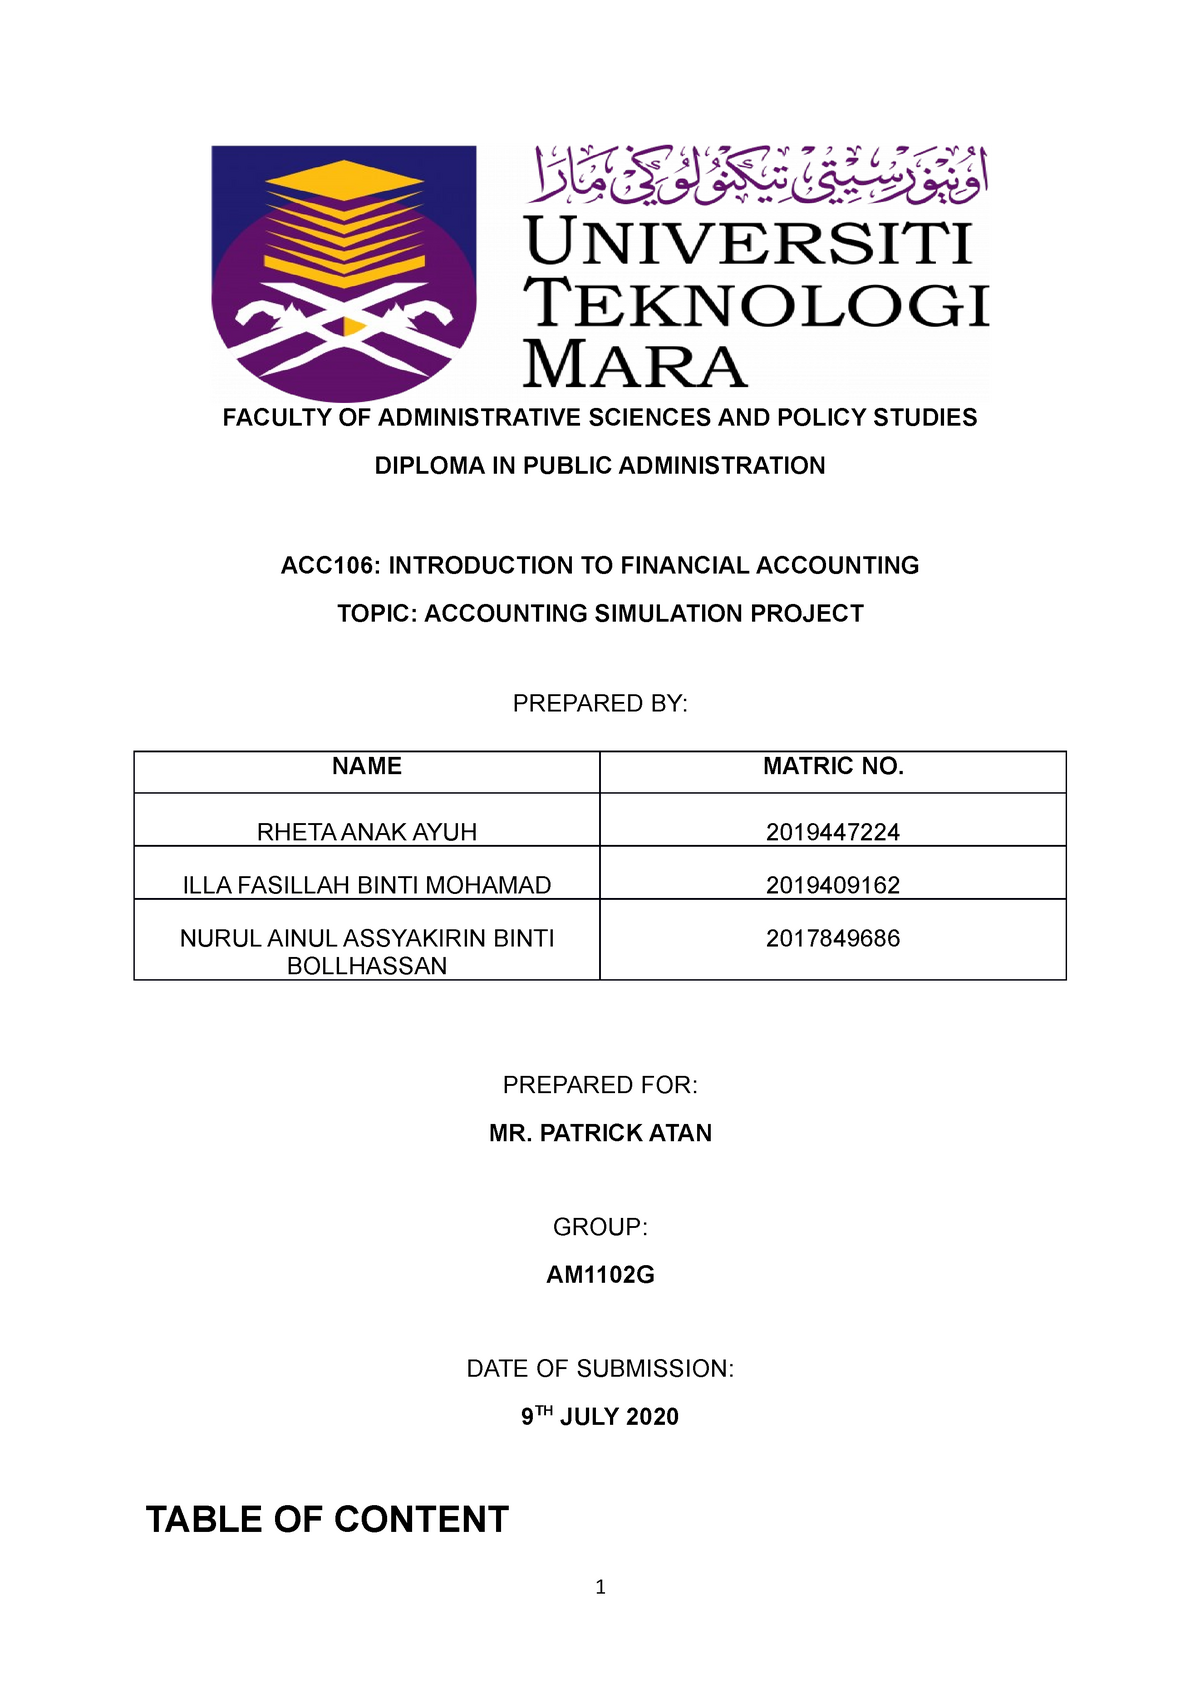 group assignment acc106 uitm